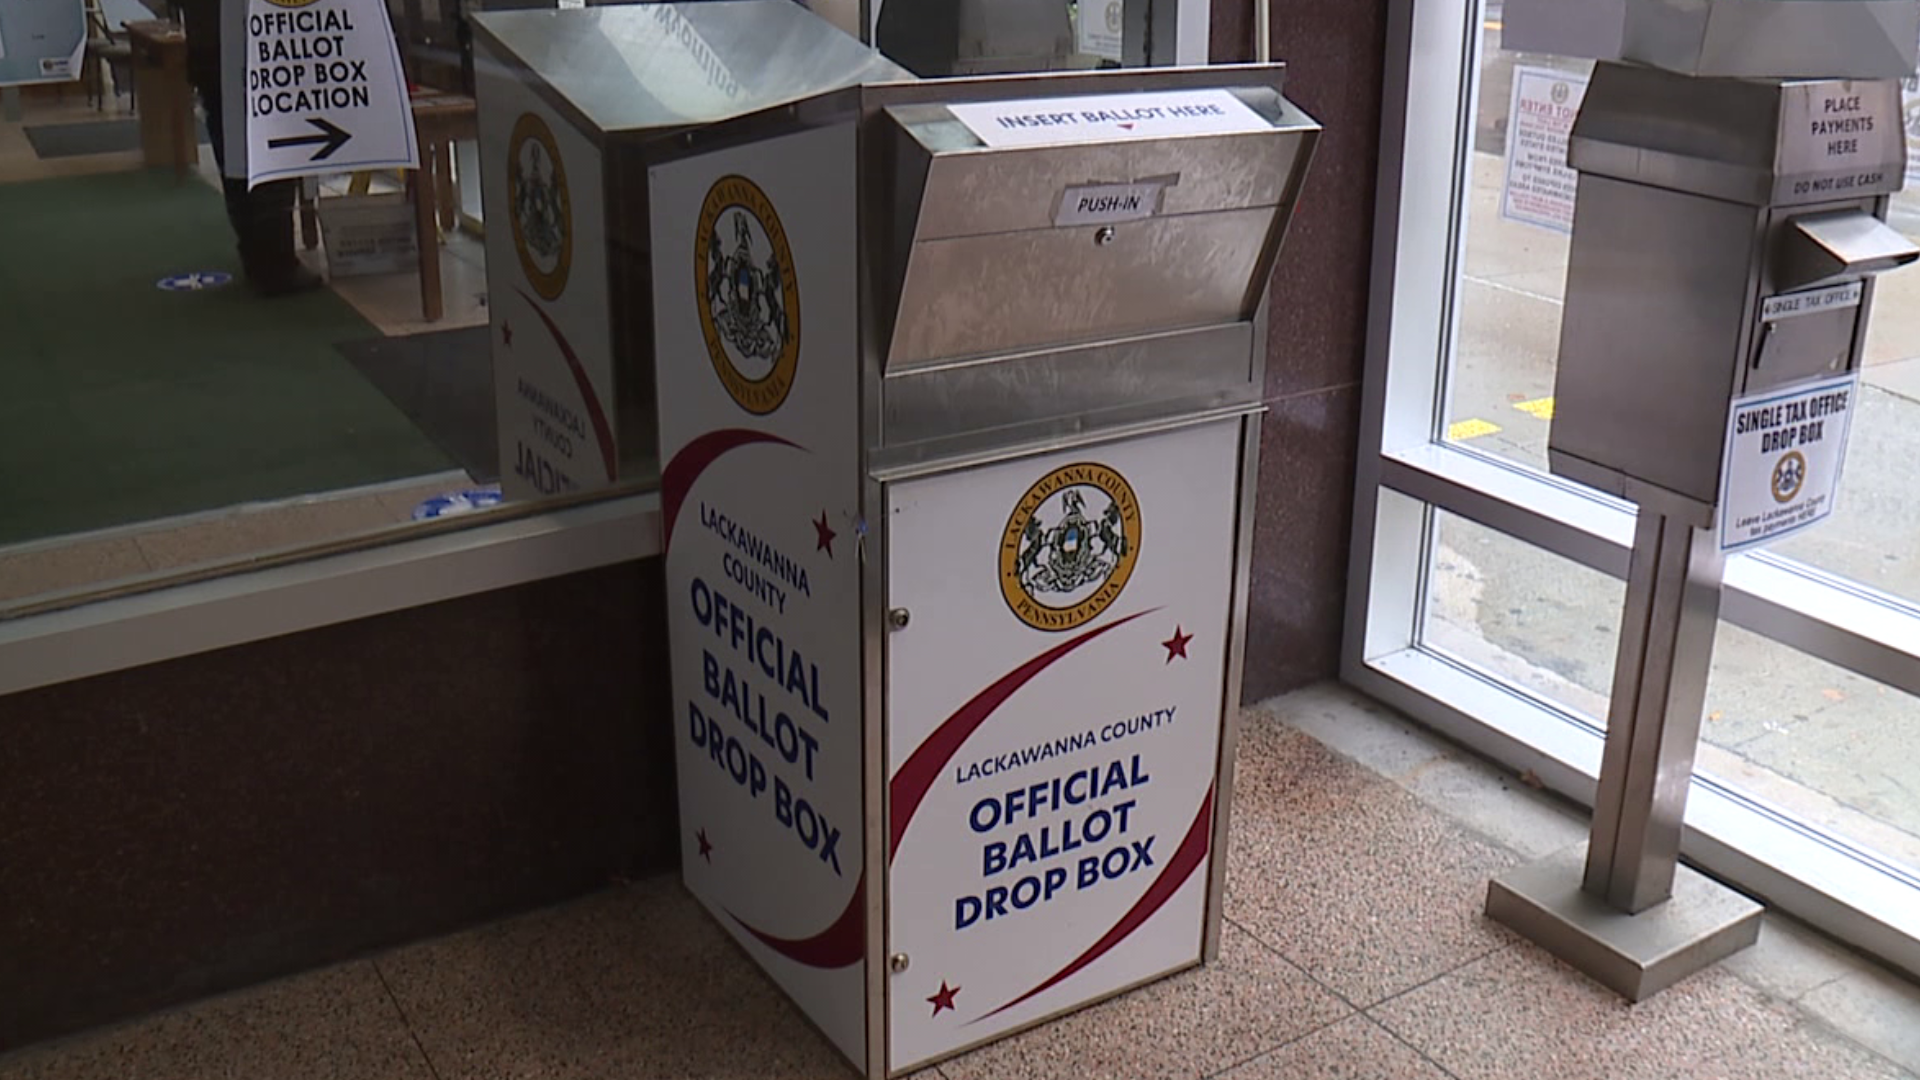 After Friday, voters in Lackawanna County who still want to drop off their mail-in ballot will only have one option.